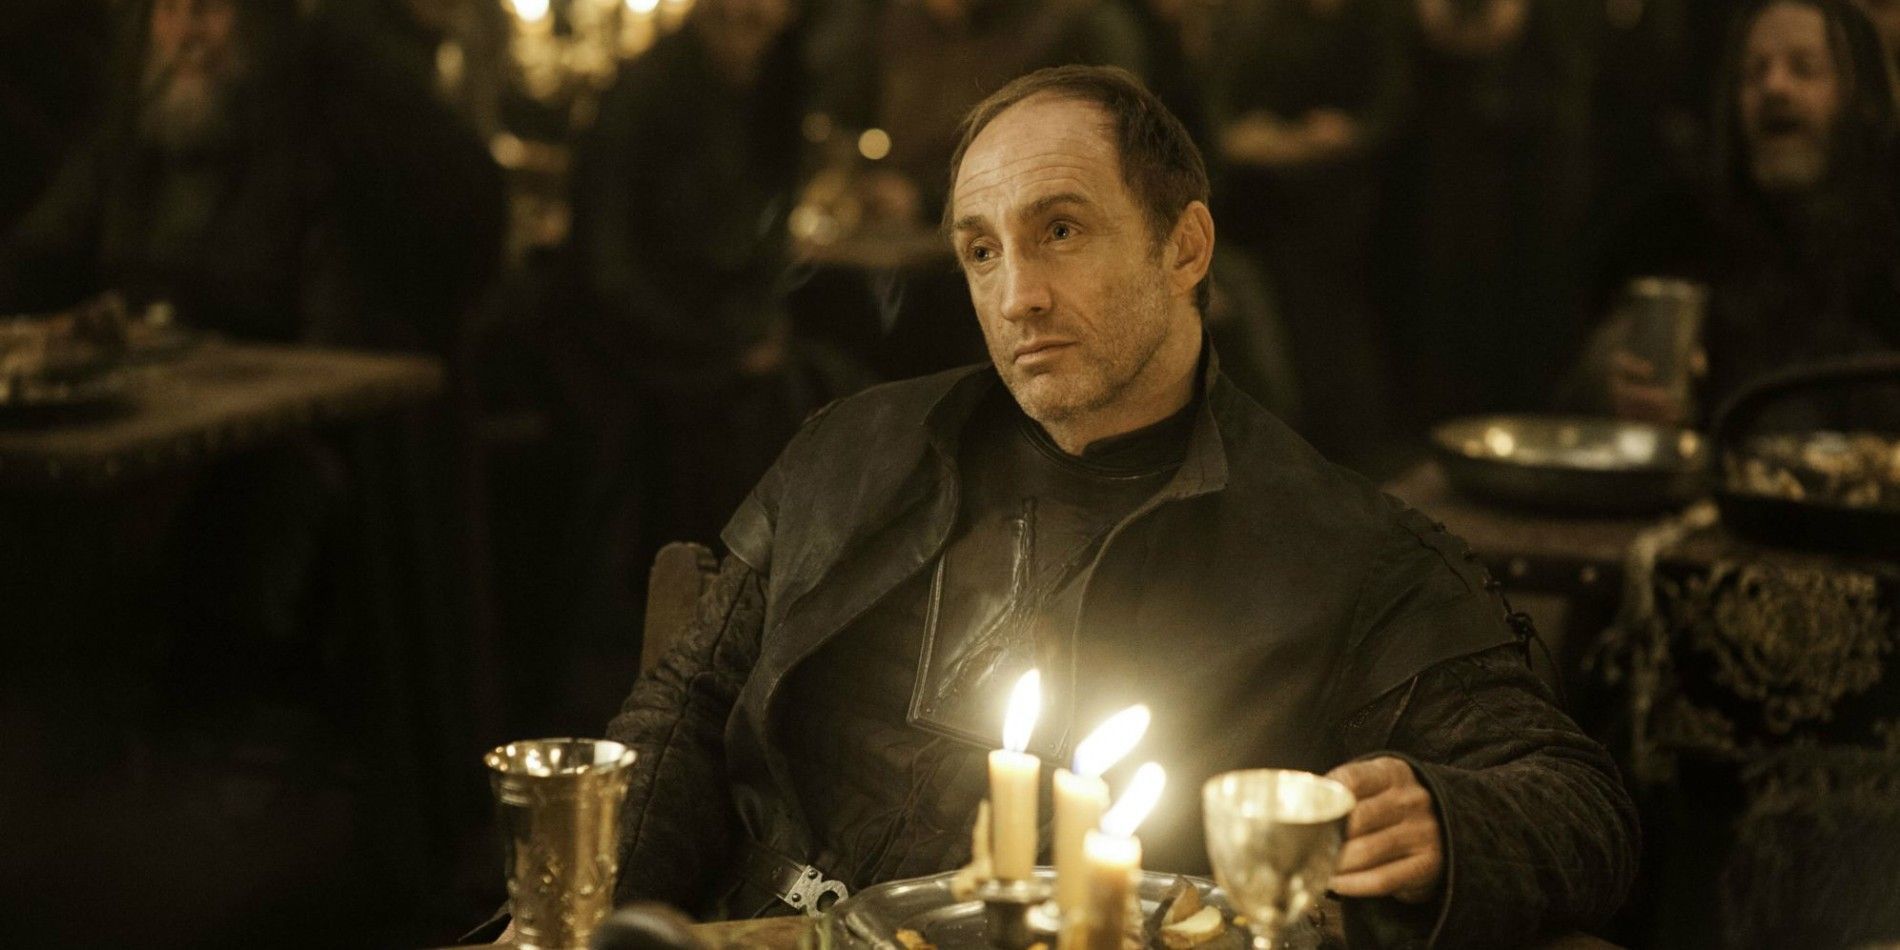 Roose Bolton from Game of Thrones